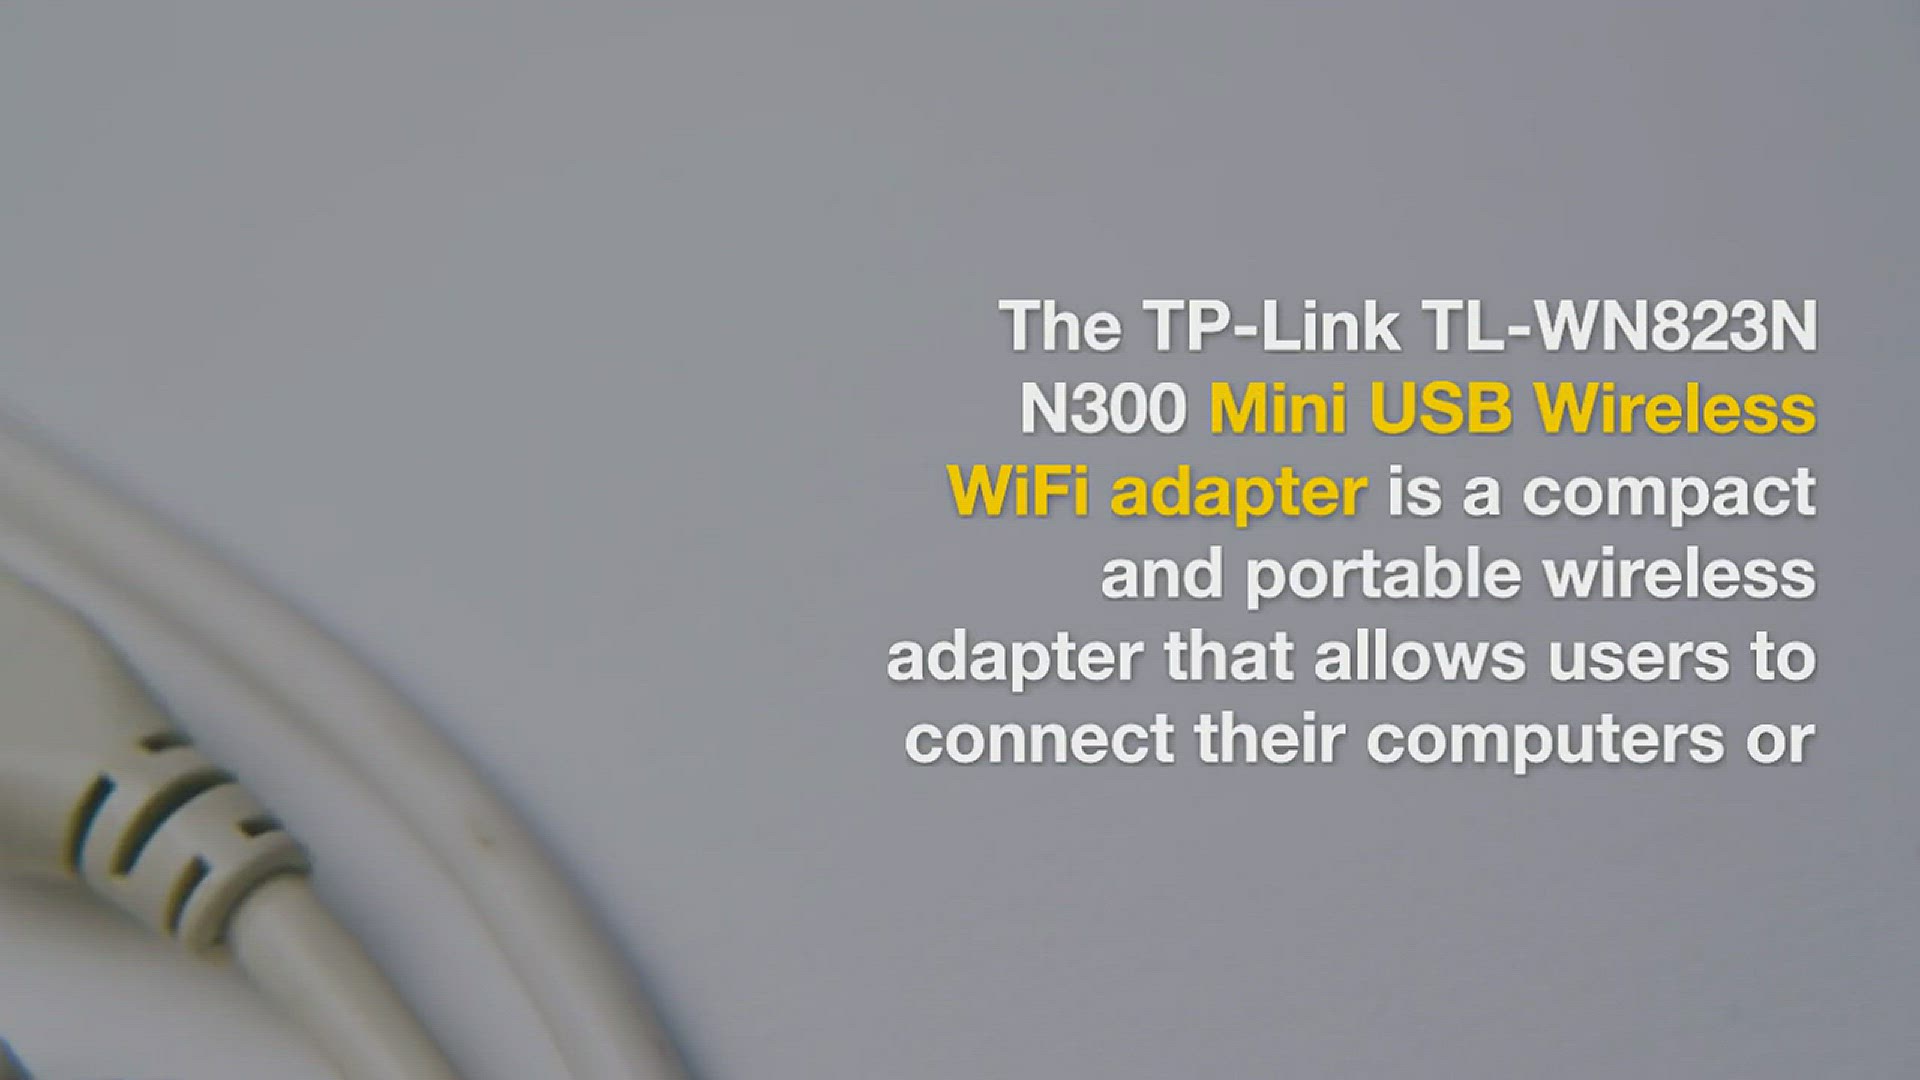 What is a Wireless USB Adapter? picture) Network (with